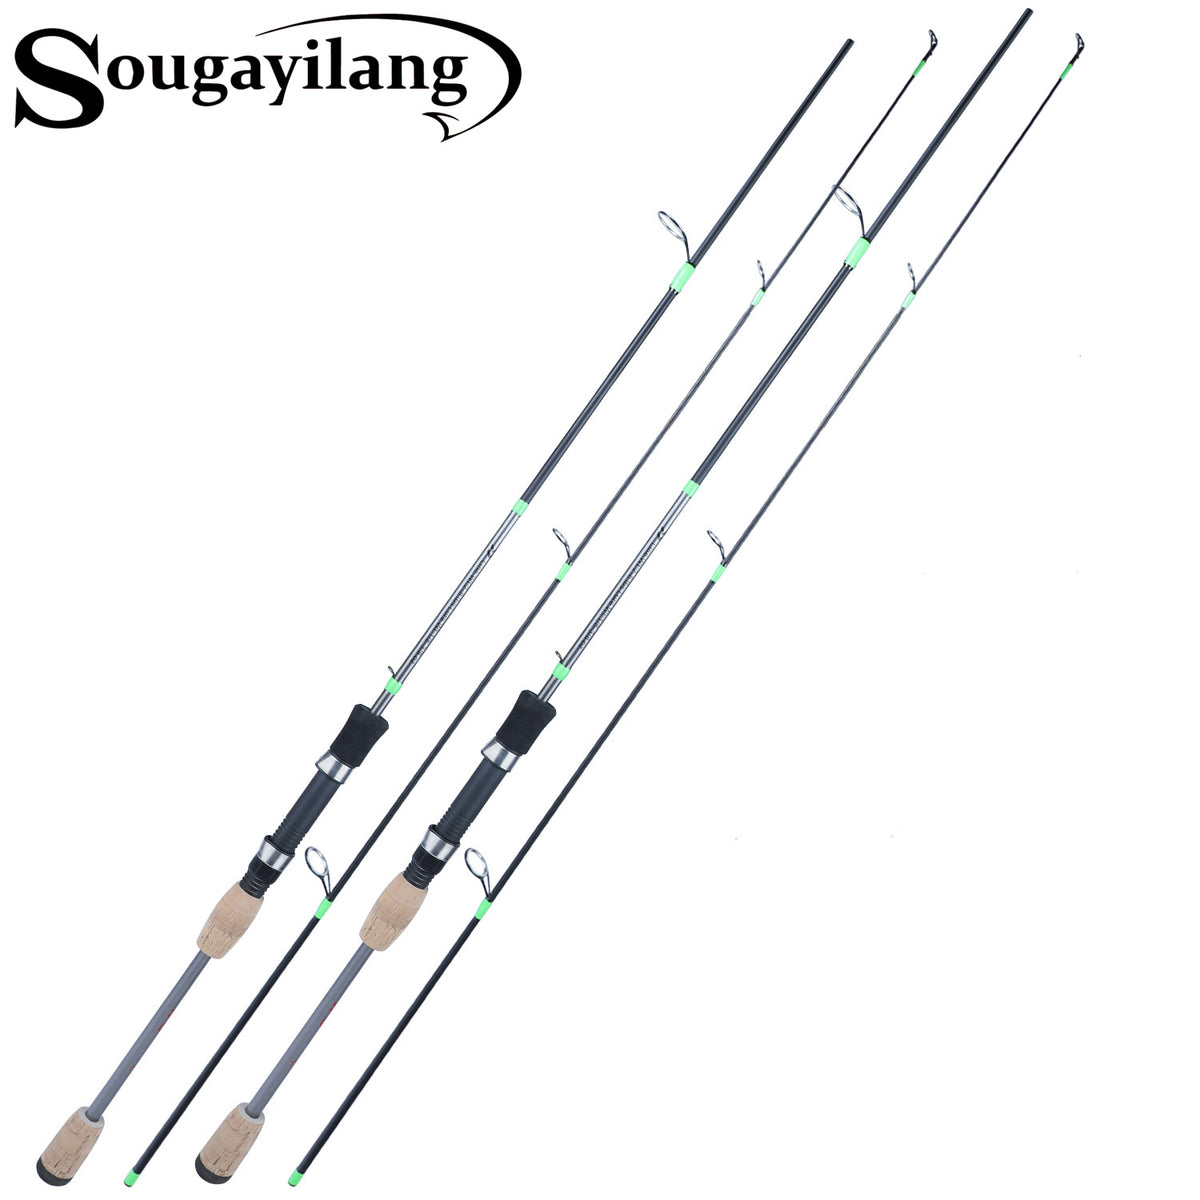 Sougayilang Flexible Fishing Rods, Spinning Rods & Casting Rods, Ligh